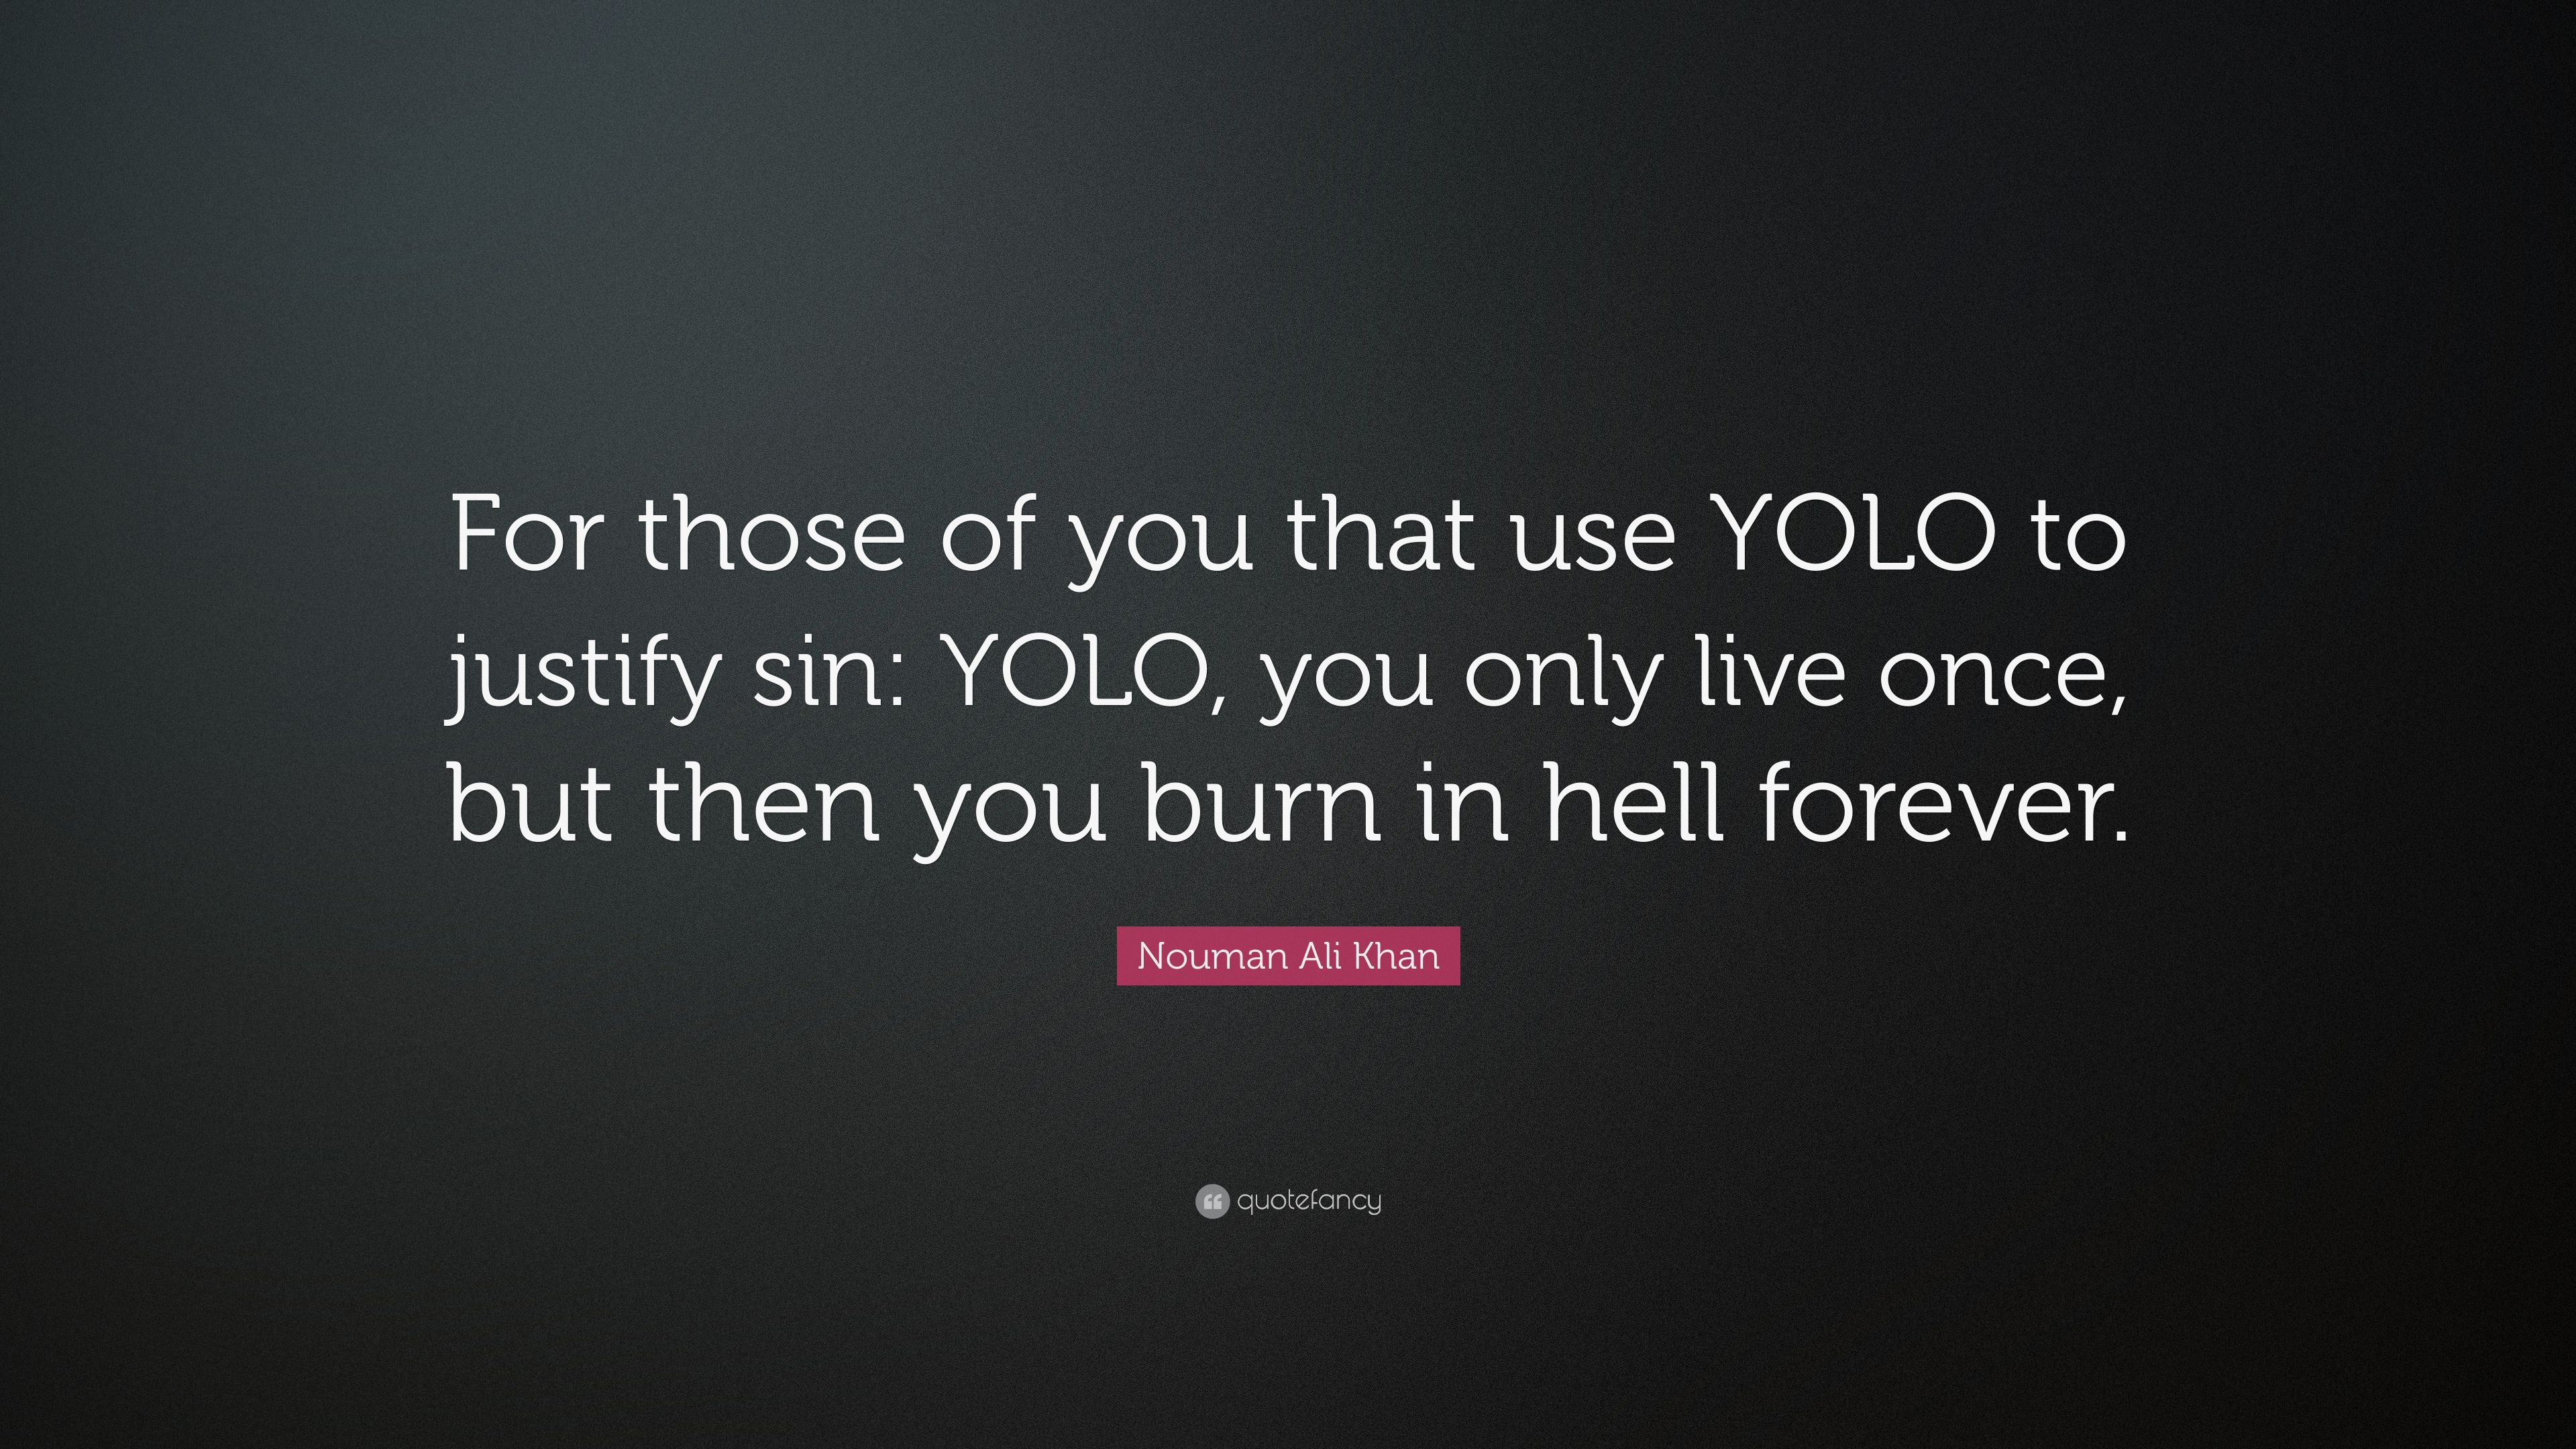 Nouman Ali Khan Quote: “For those of you that use YOLO to justify